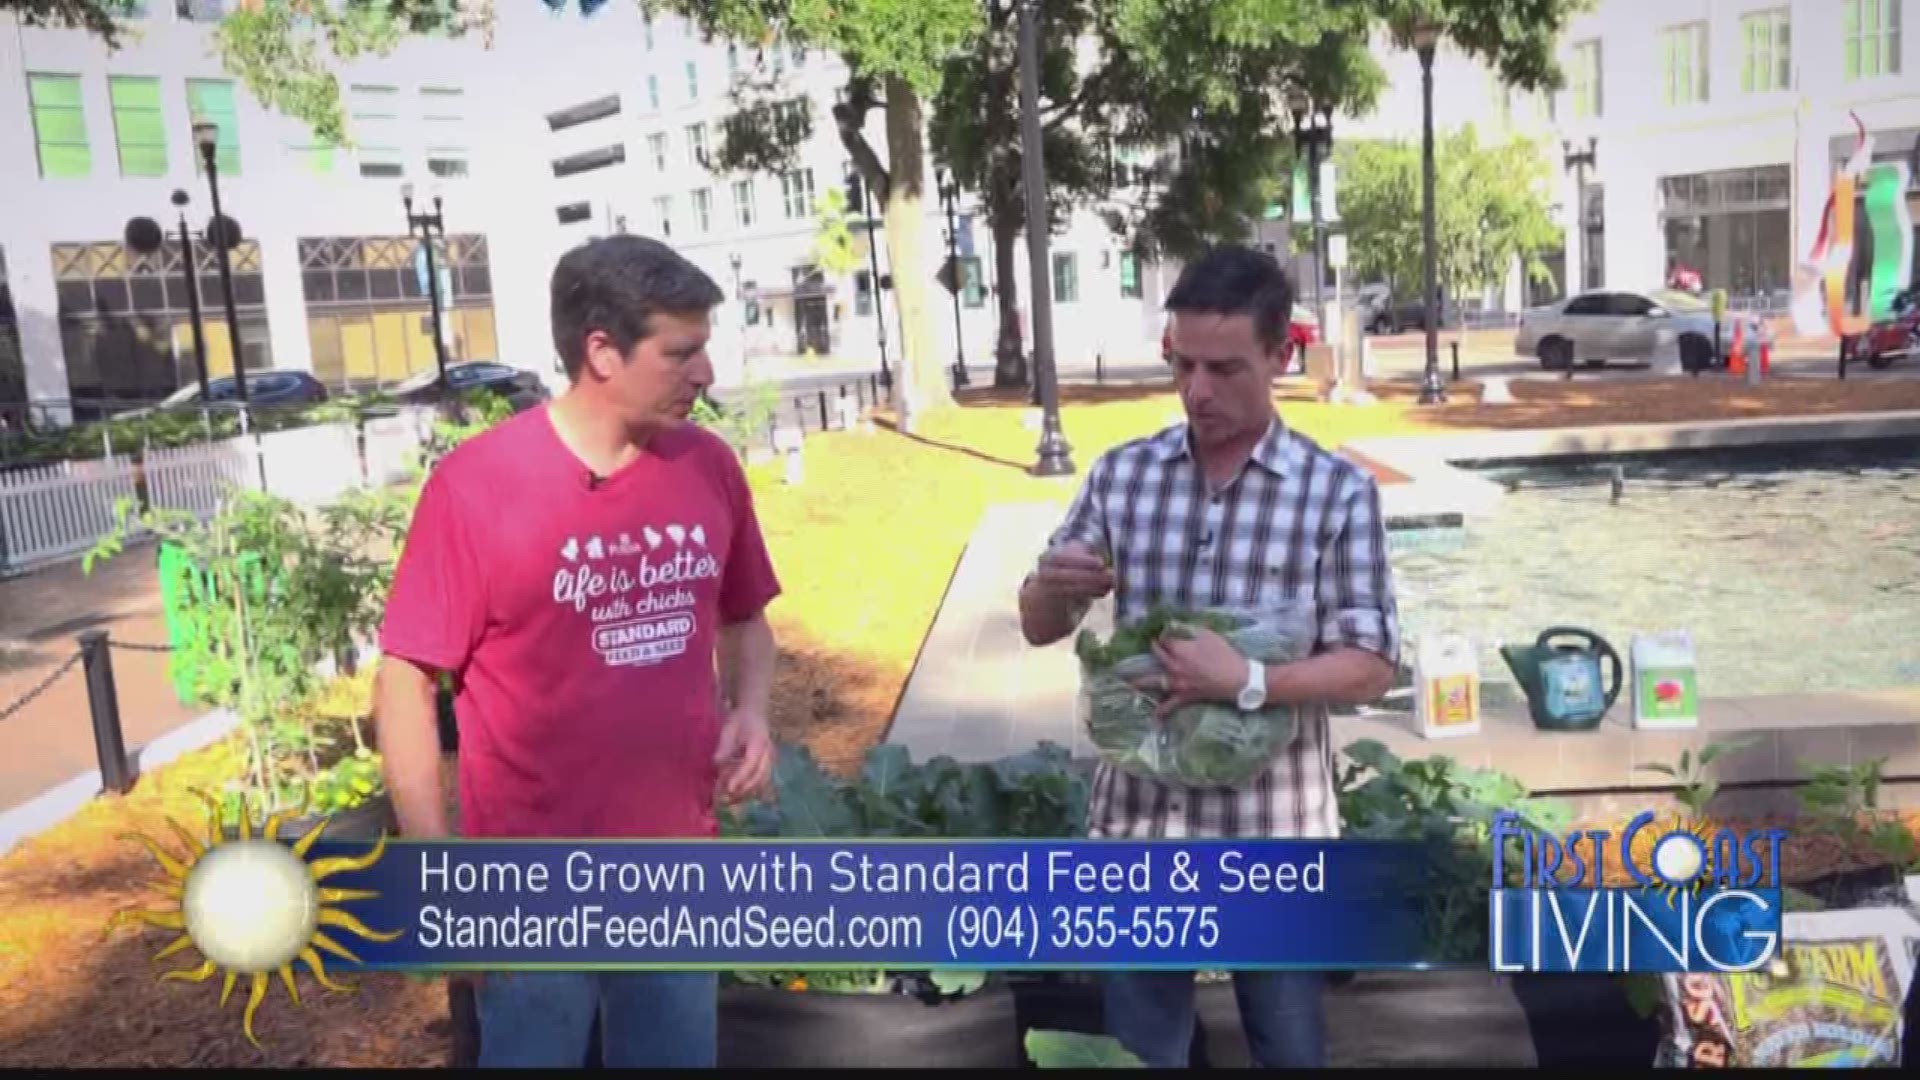 Home Grown garden in Hemming Park with Standard Feed & Seed